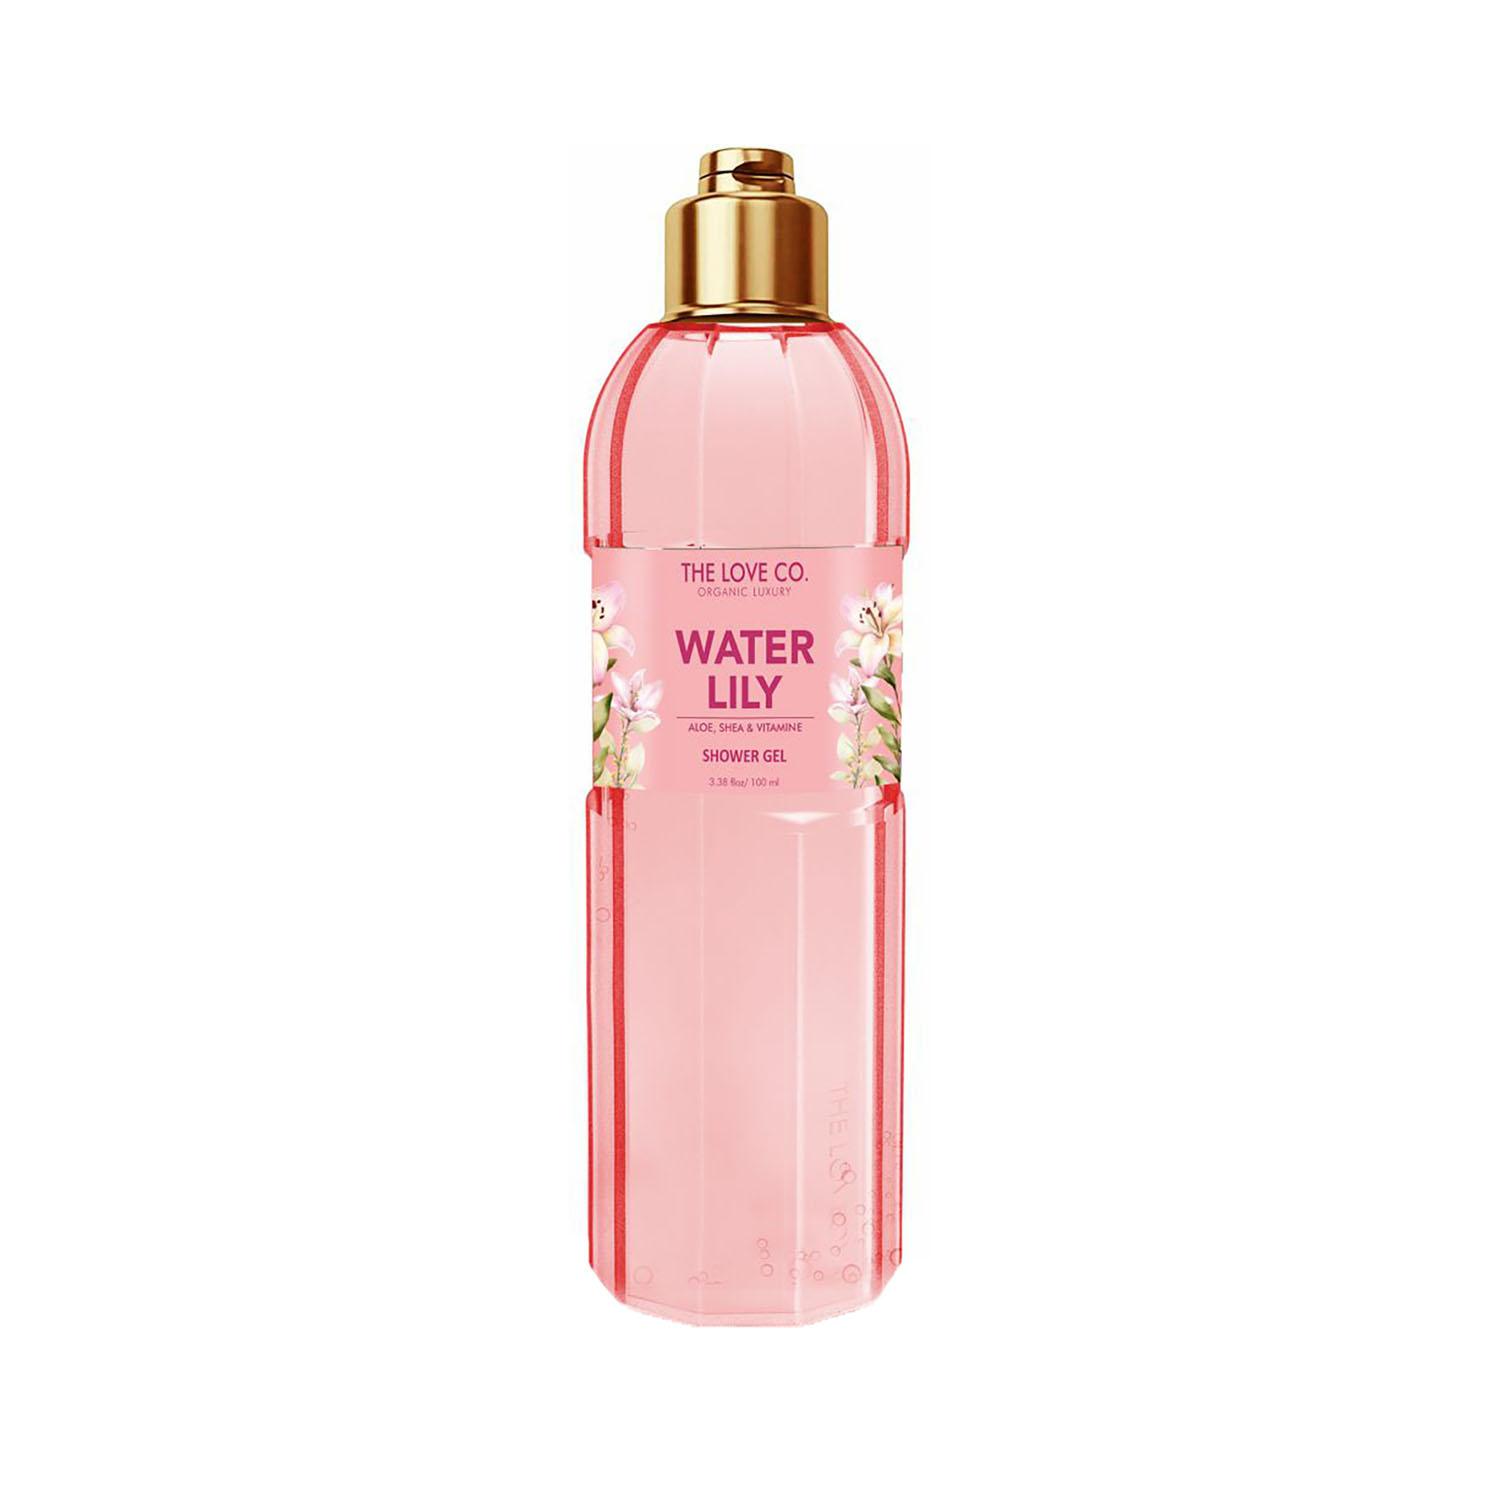 THE LOVE CO. | THE LOVE CO. Water Lily Shower Gel (100ml)